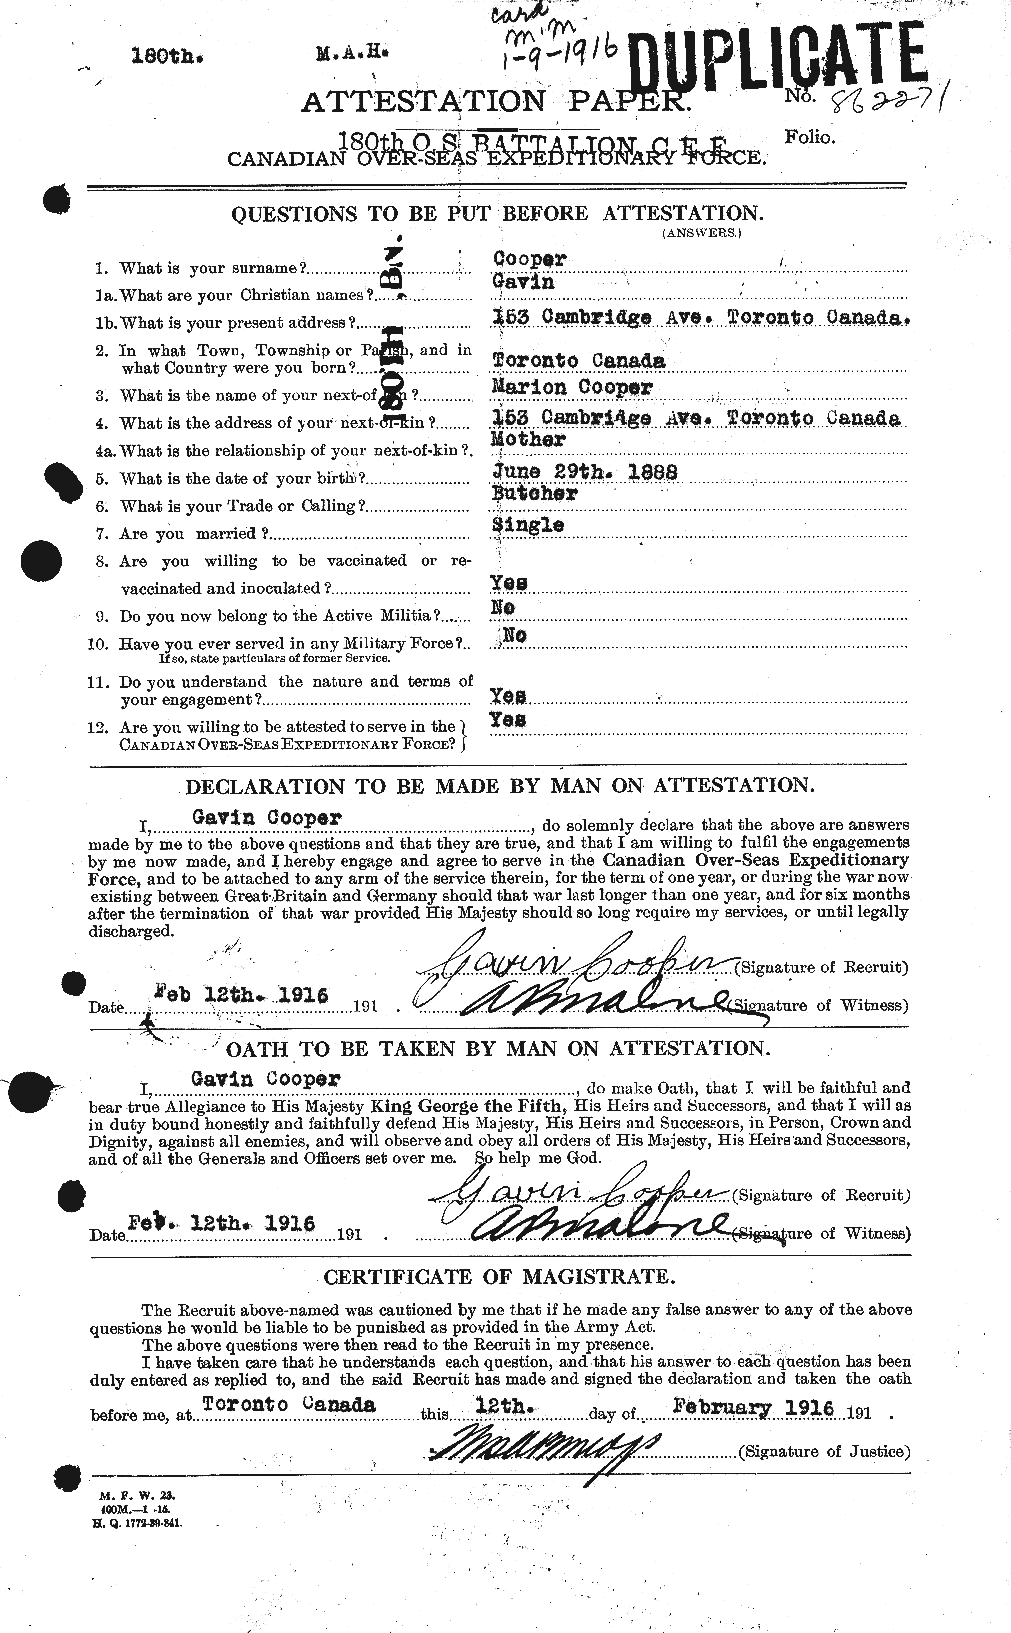 Personnel Records of the First World War - CEF 057812a